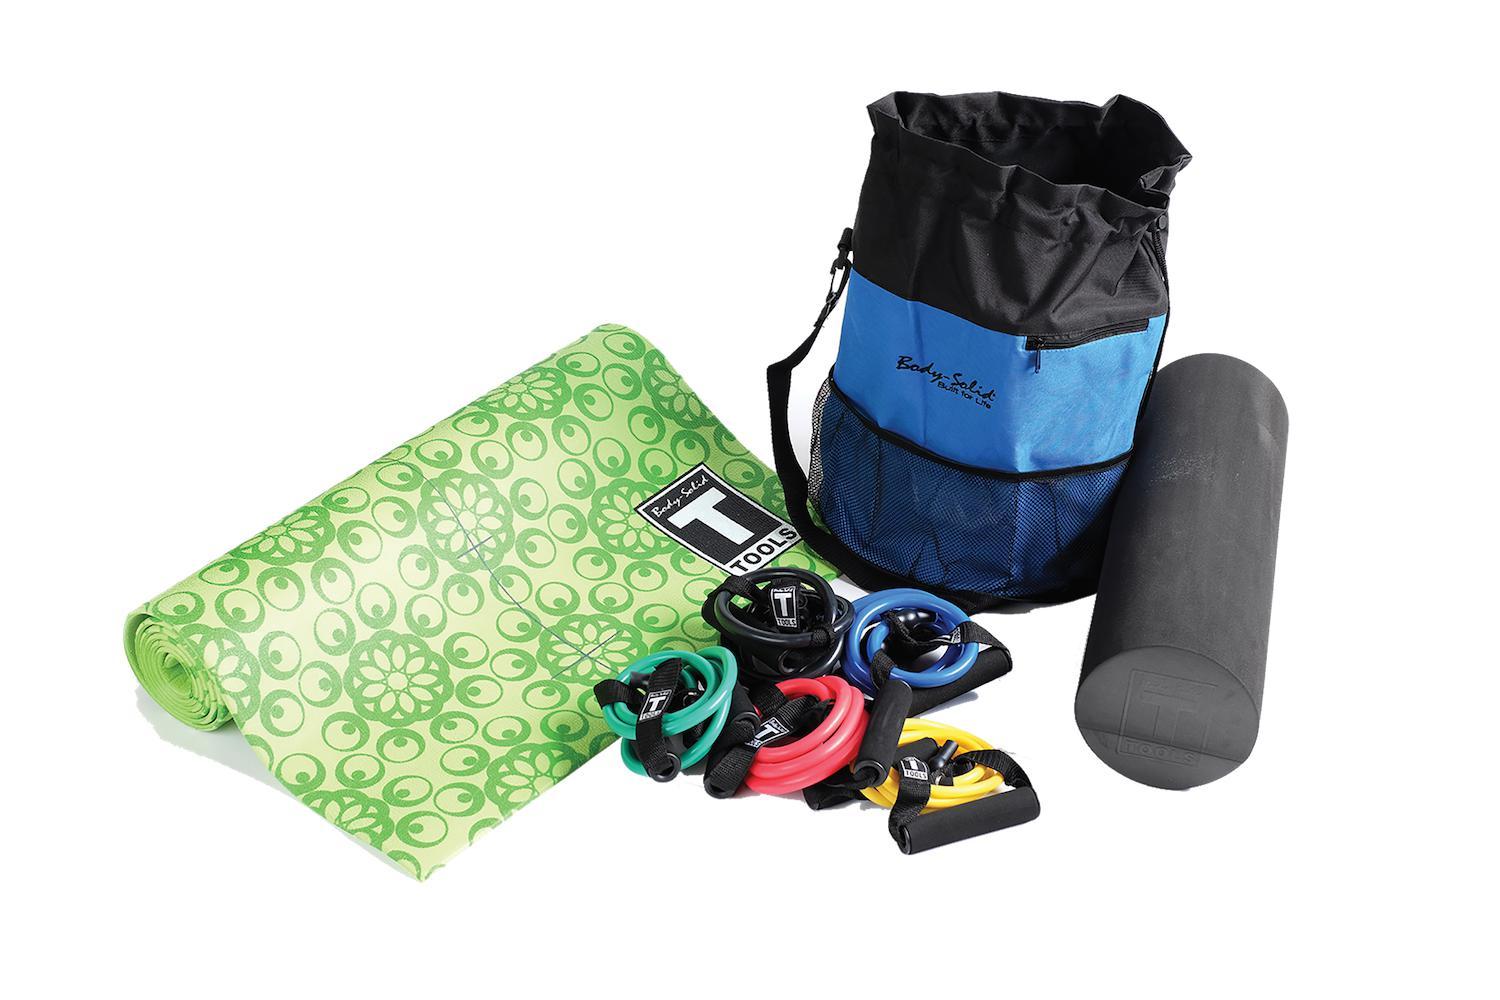 Body-Solid Tools Fitness Room Pack.